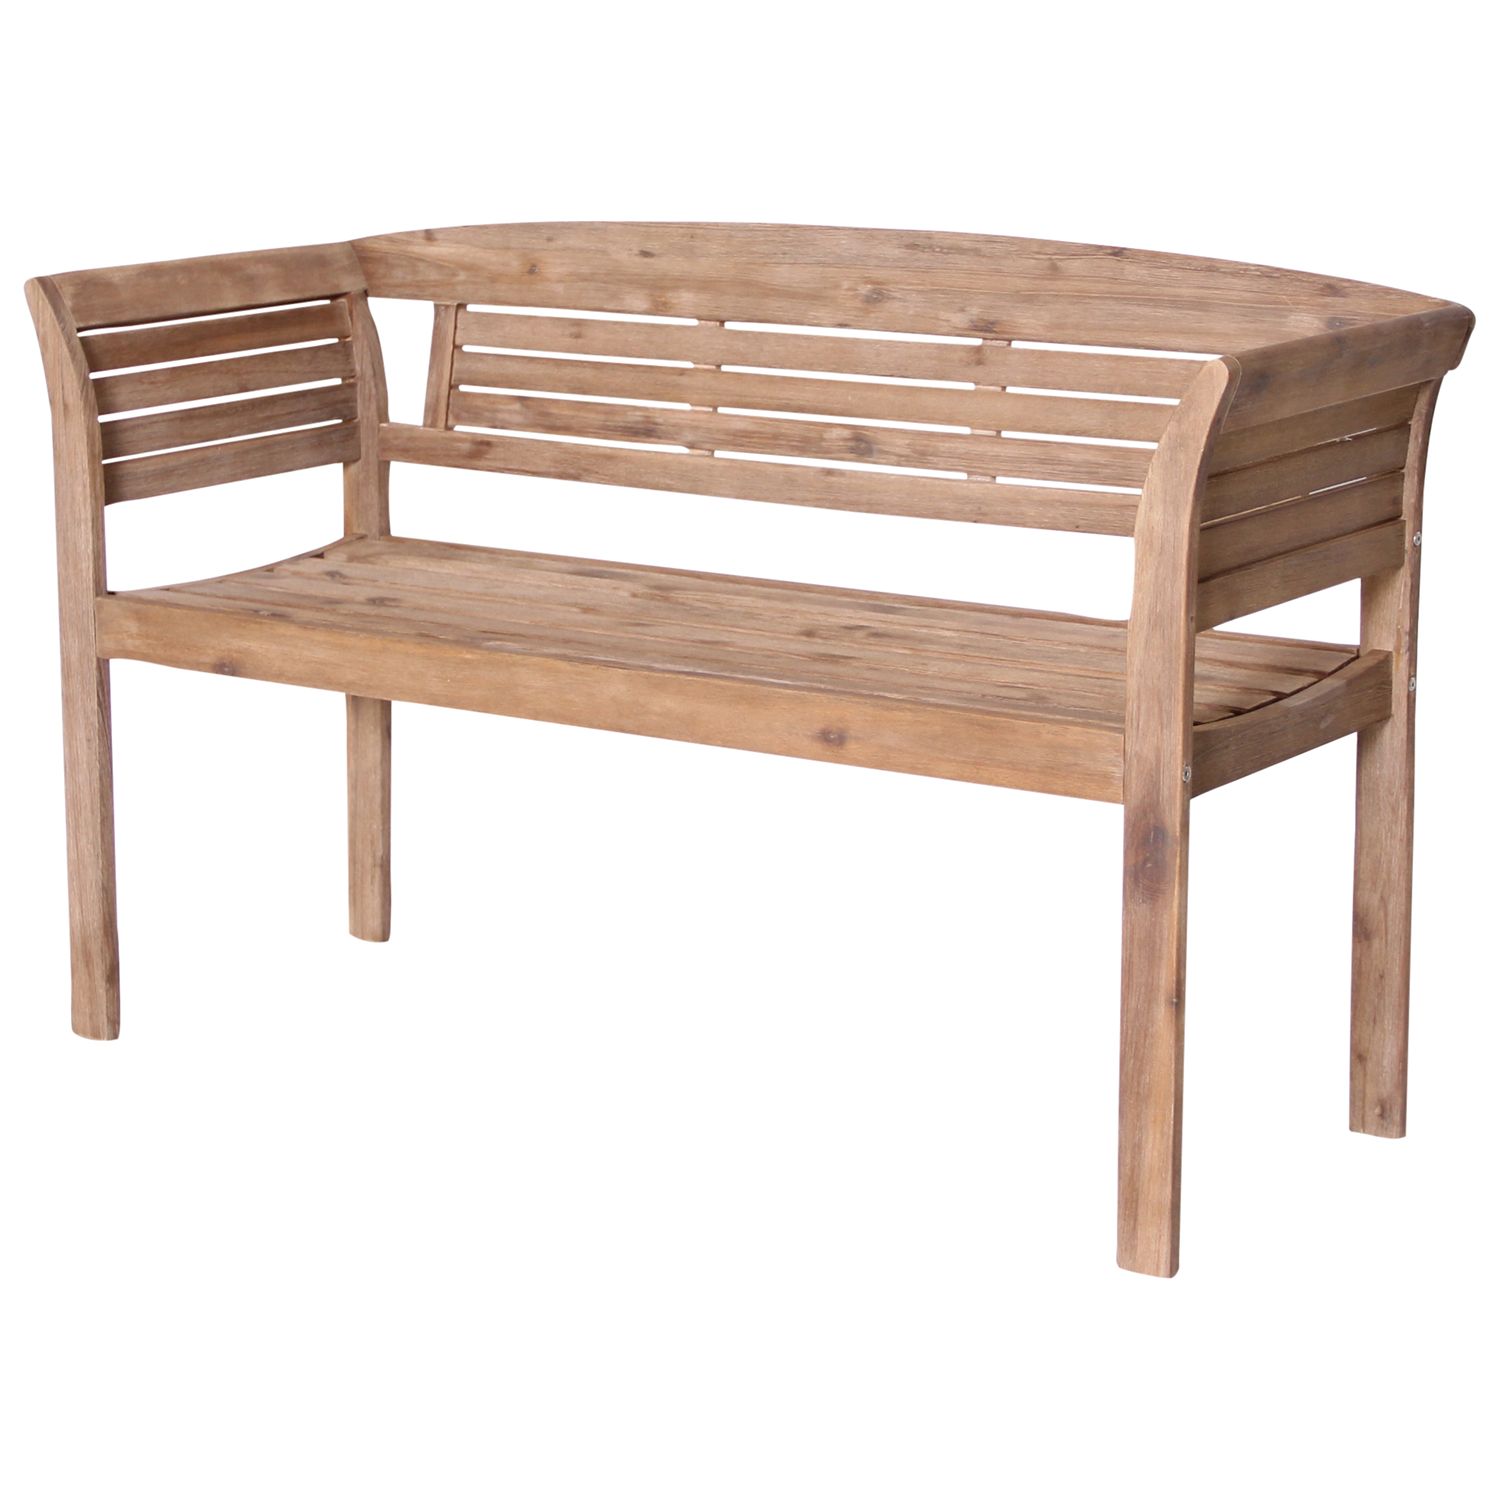 Buy LG Outdoor Hanoi 2-Seater Bistro Bench, FSC-certified (Acacia) Online at johnlewis.com